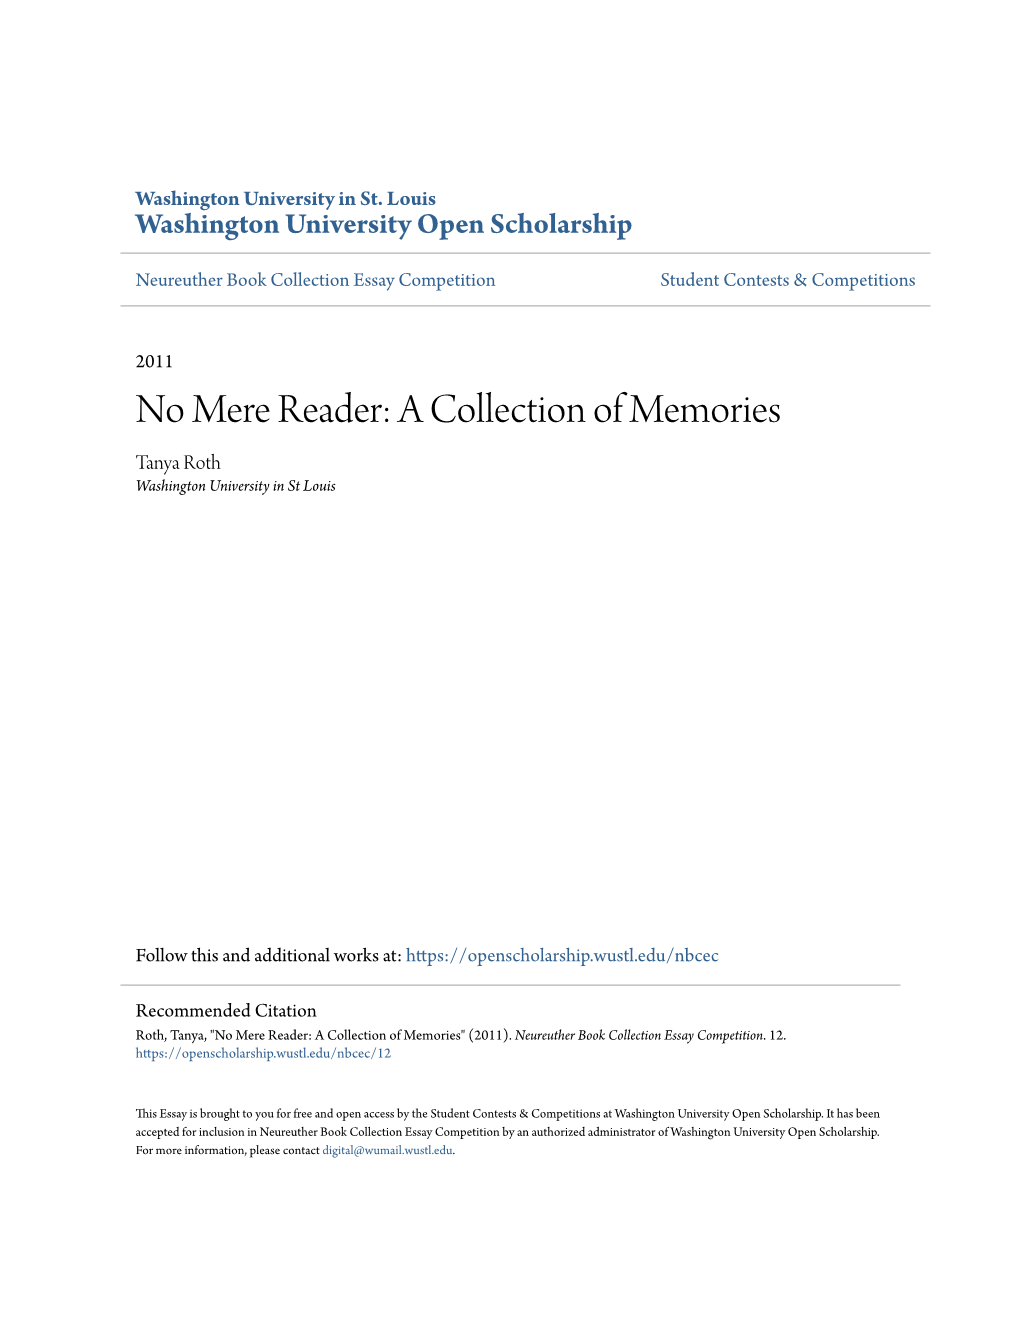 No Mere Reader: a Collection of Memories Tanya Roth Washington University in St Louis